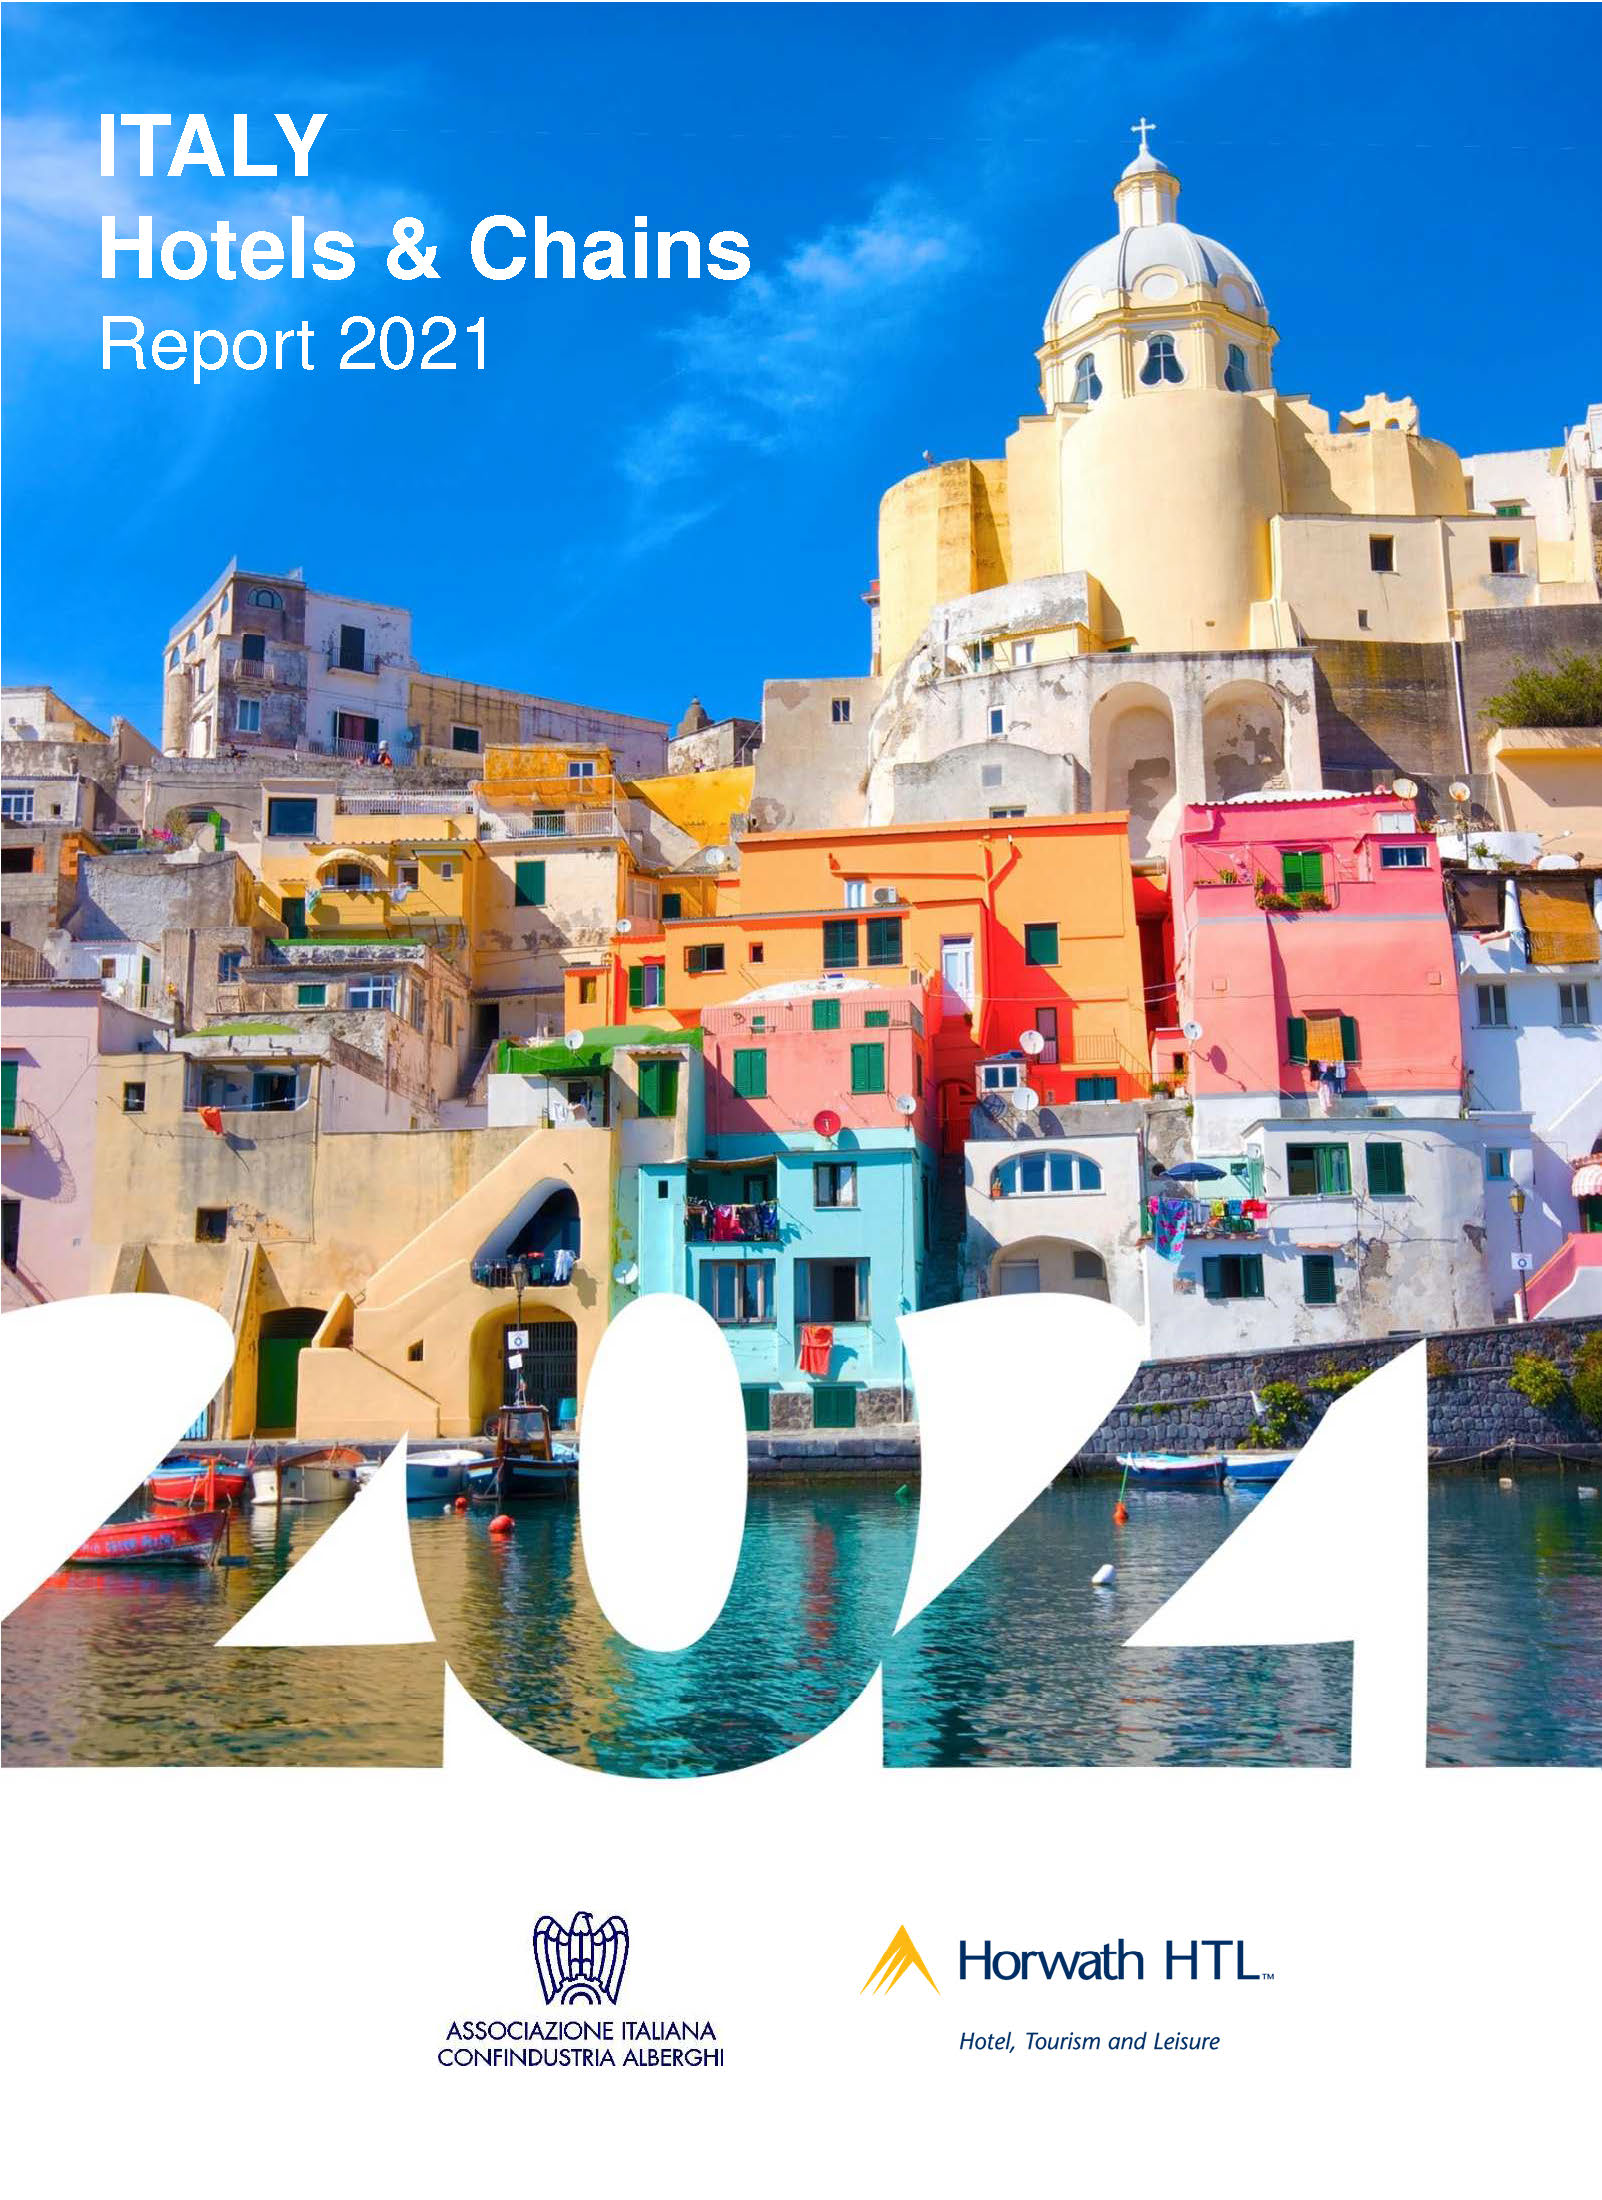 Italy Hotels & Chains Report 2021